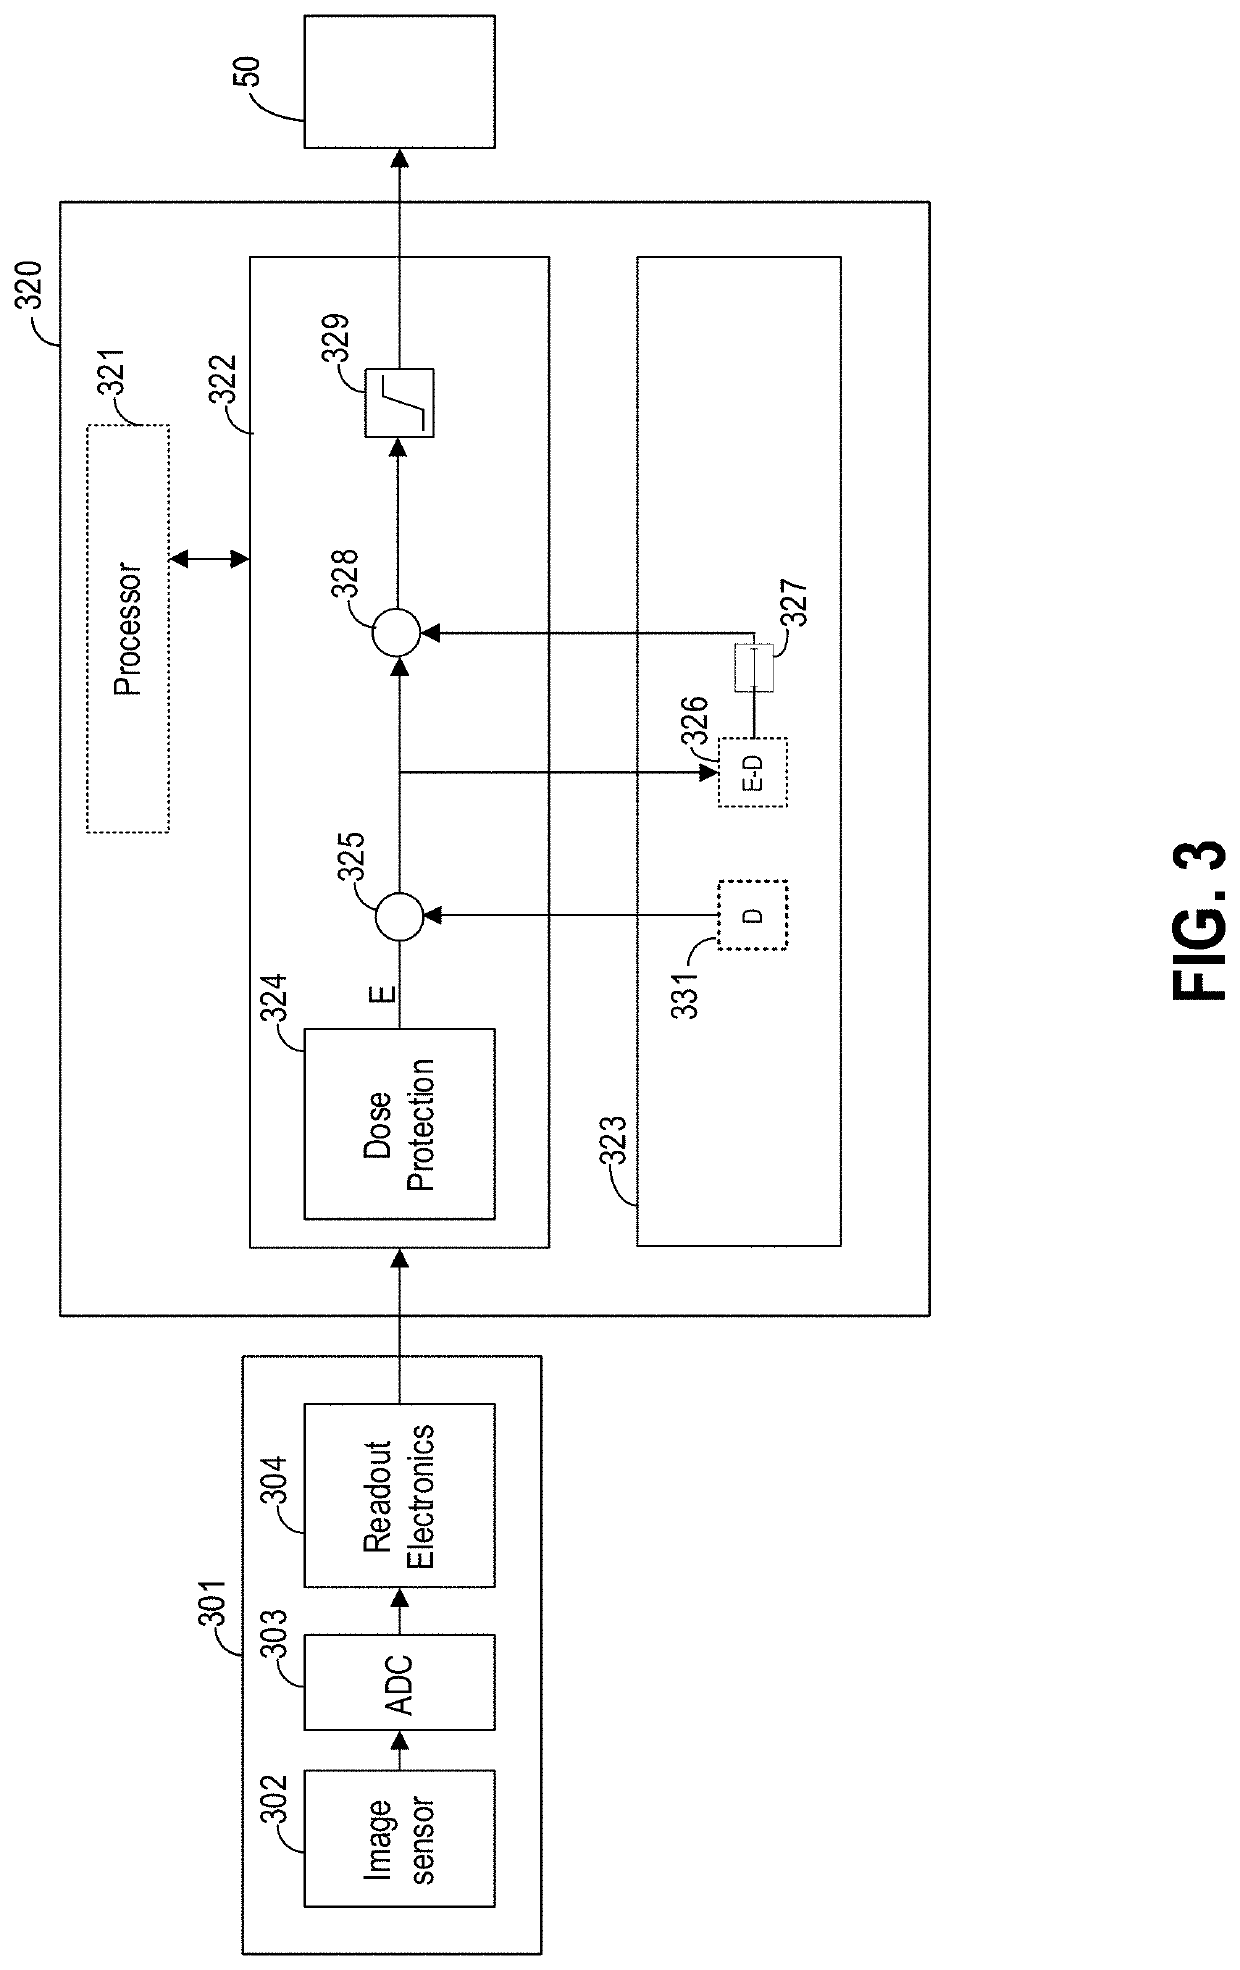 Method and system for high speed signal processing